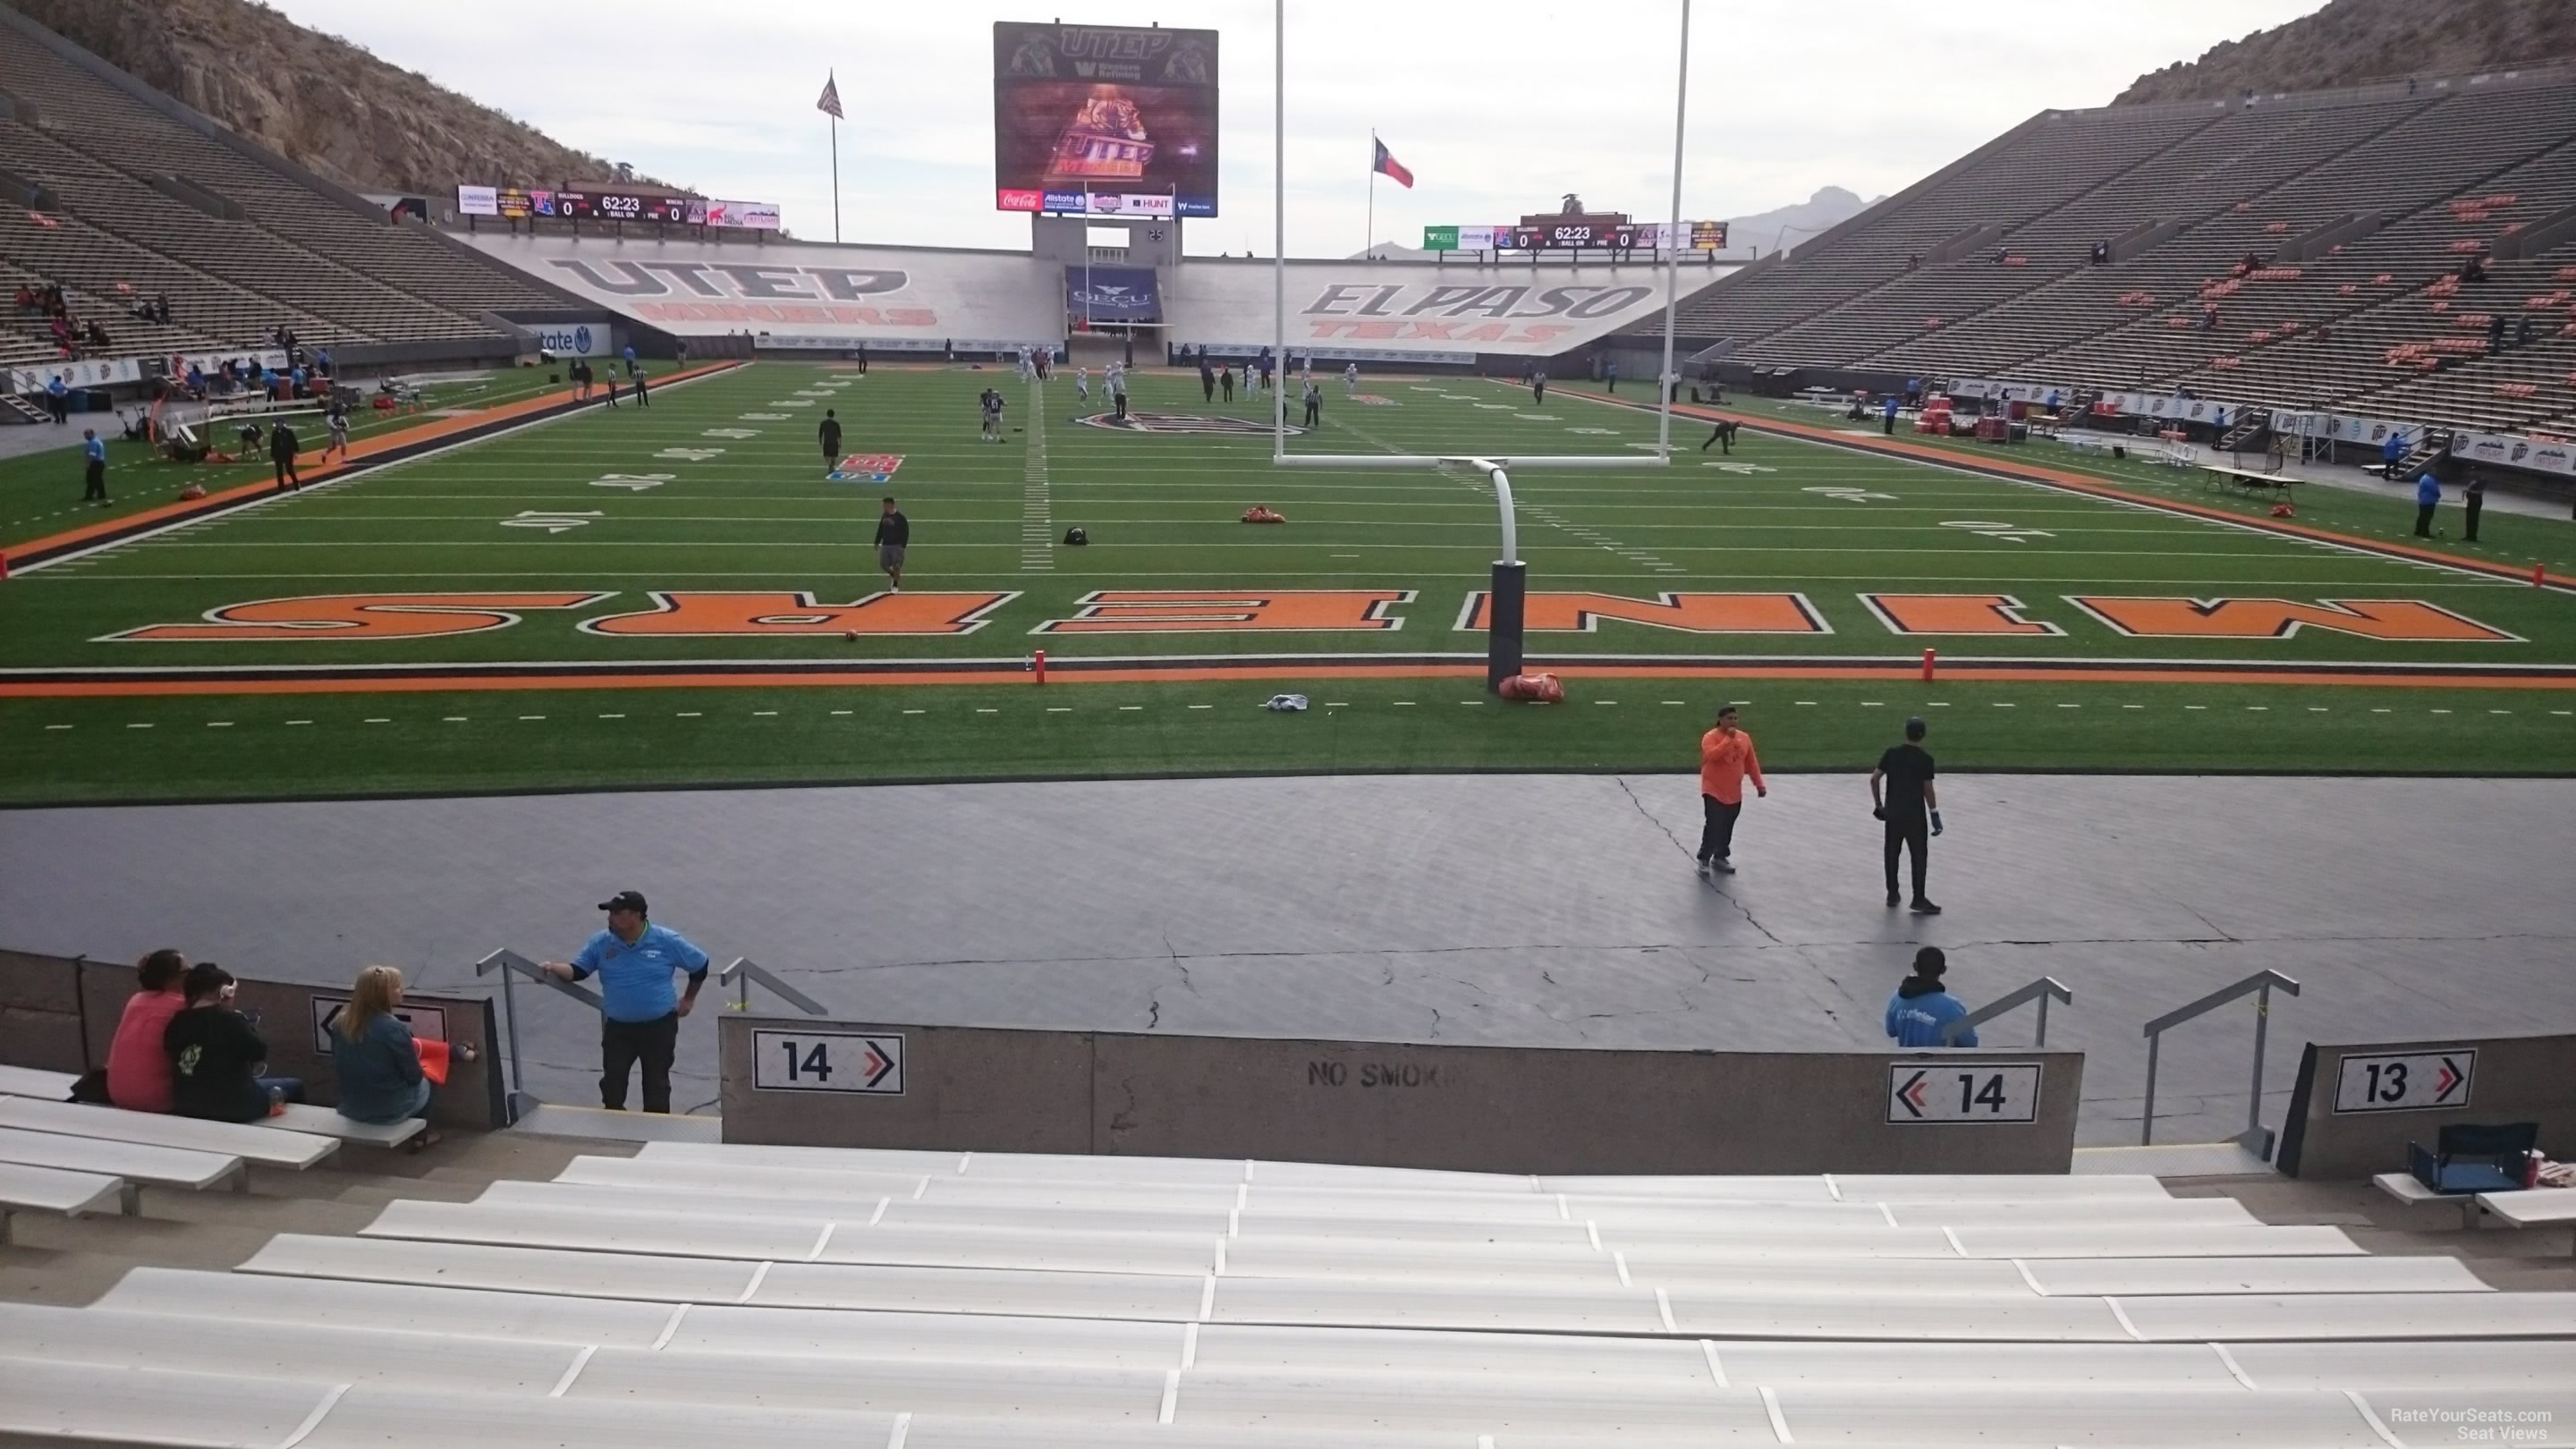 Section 14 at Sun Bowl